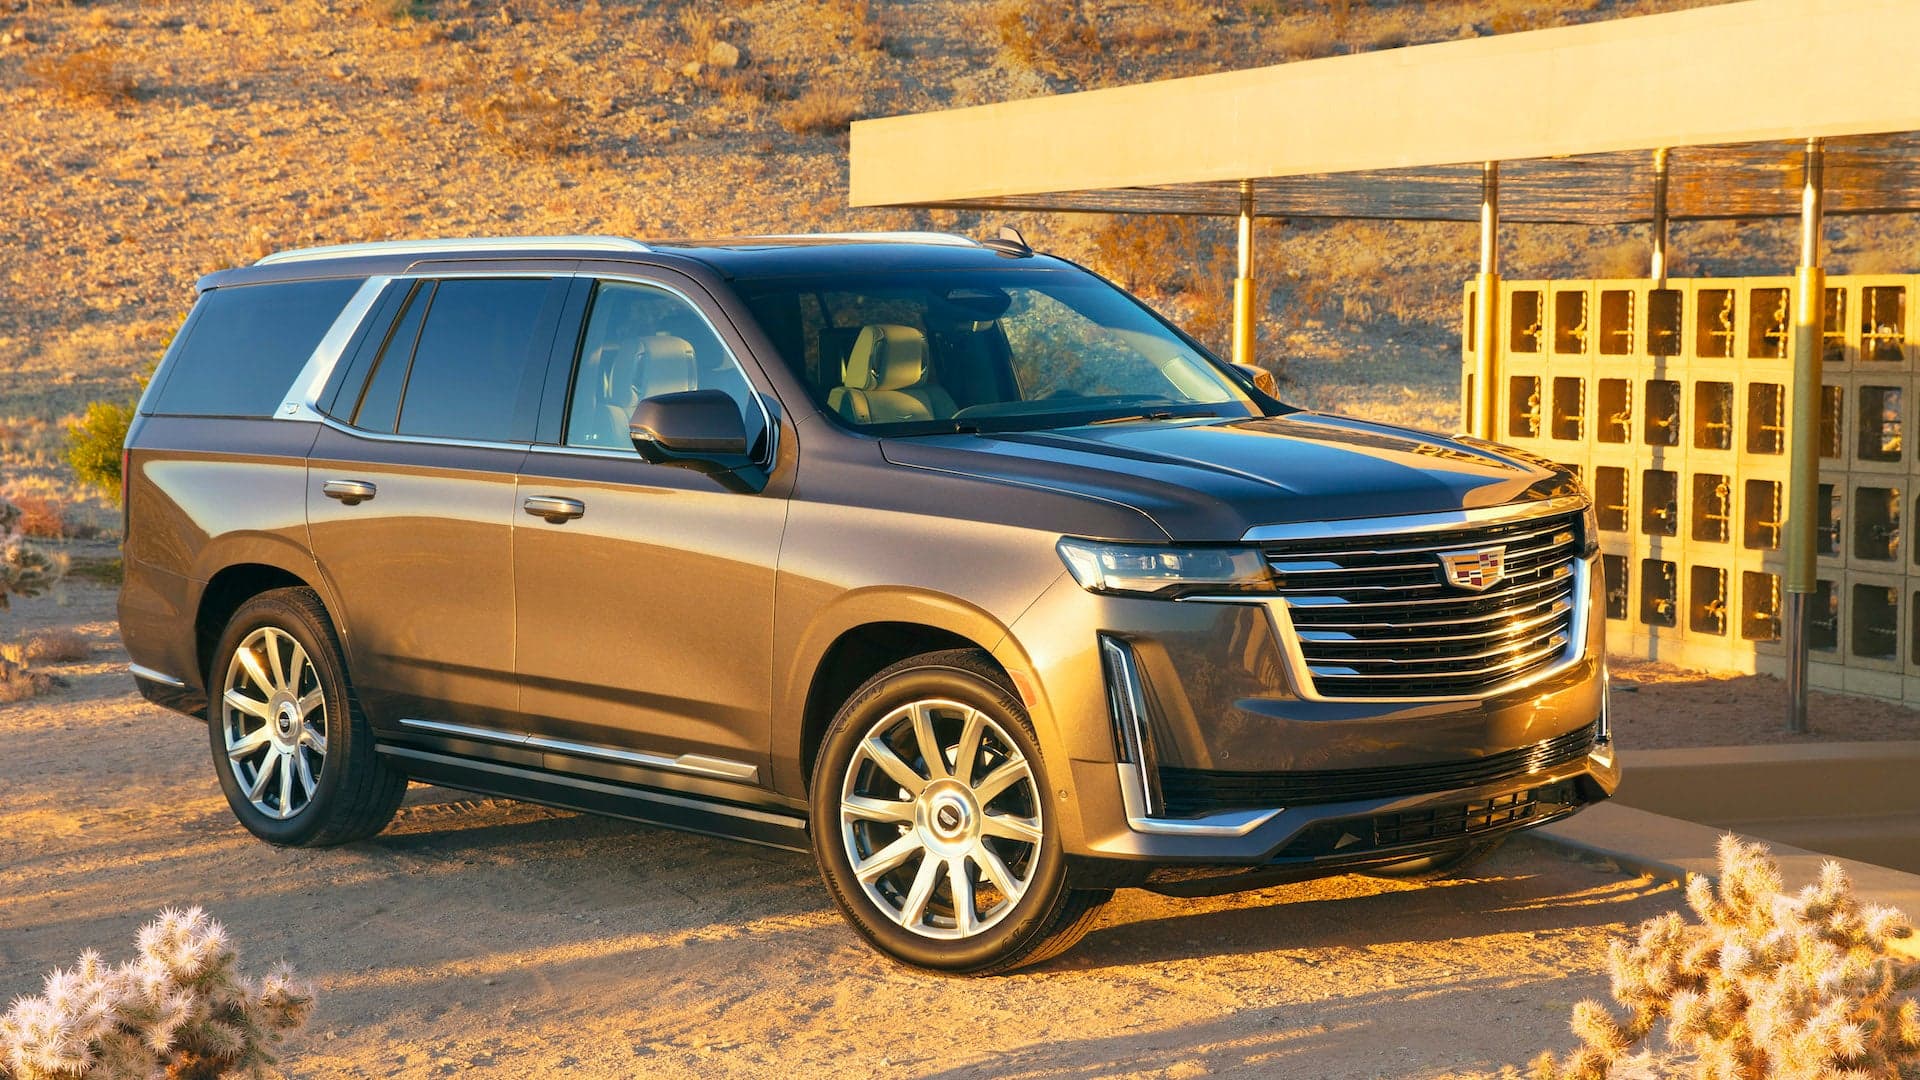 2021 Cadillac Escalade’s New Duramax Diesel Engine Is a Free Option: Report